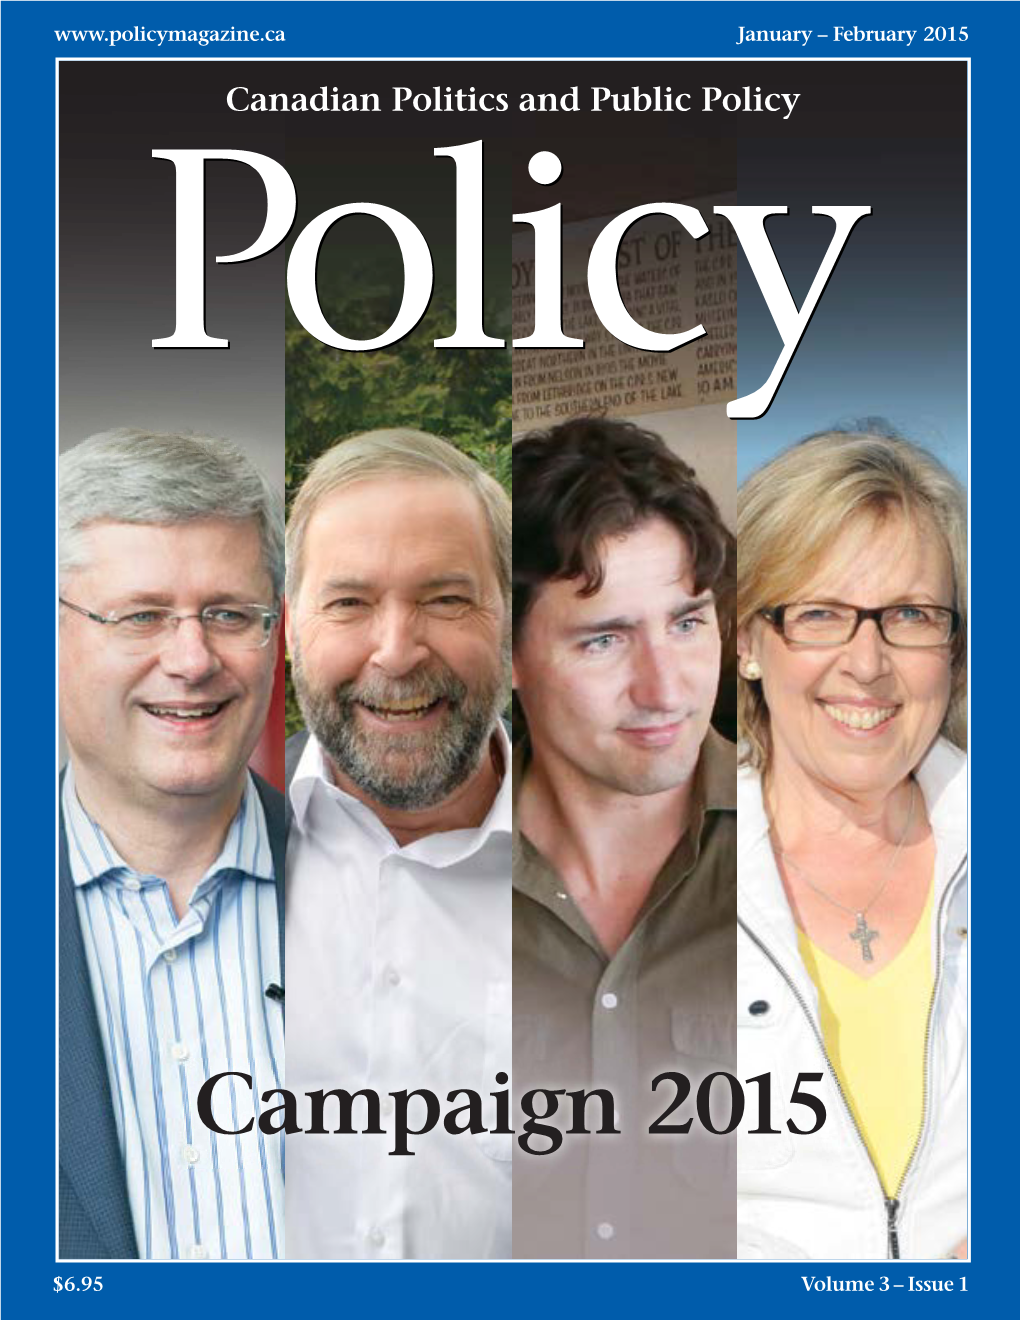 Quebec and Campaign 2015: TOM MULCAIR IS